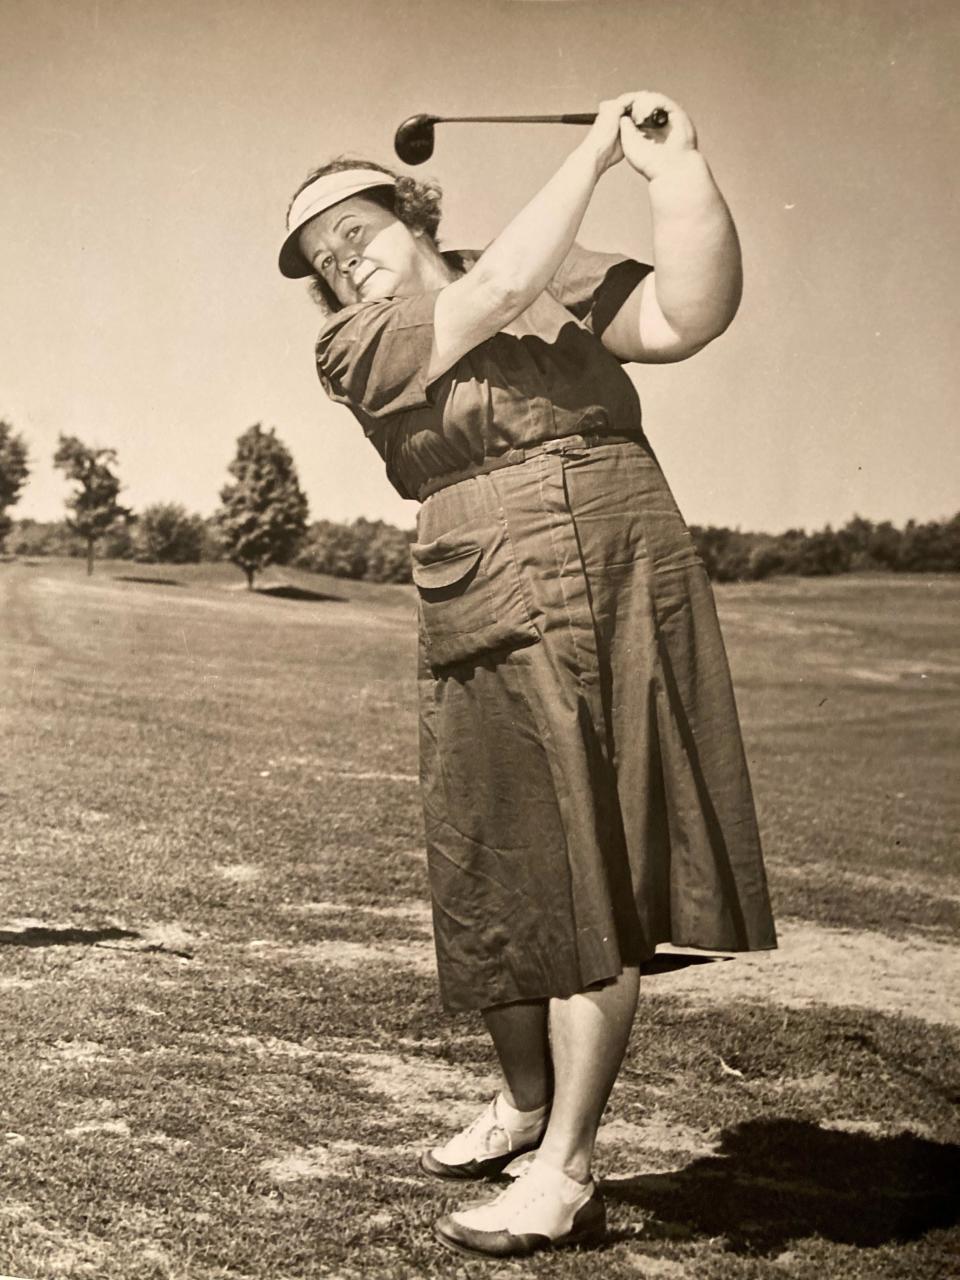 Emma Leary Behan was a golf legend in Broome County in the first half of the 20th century.